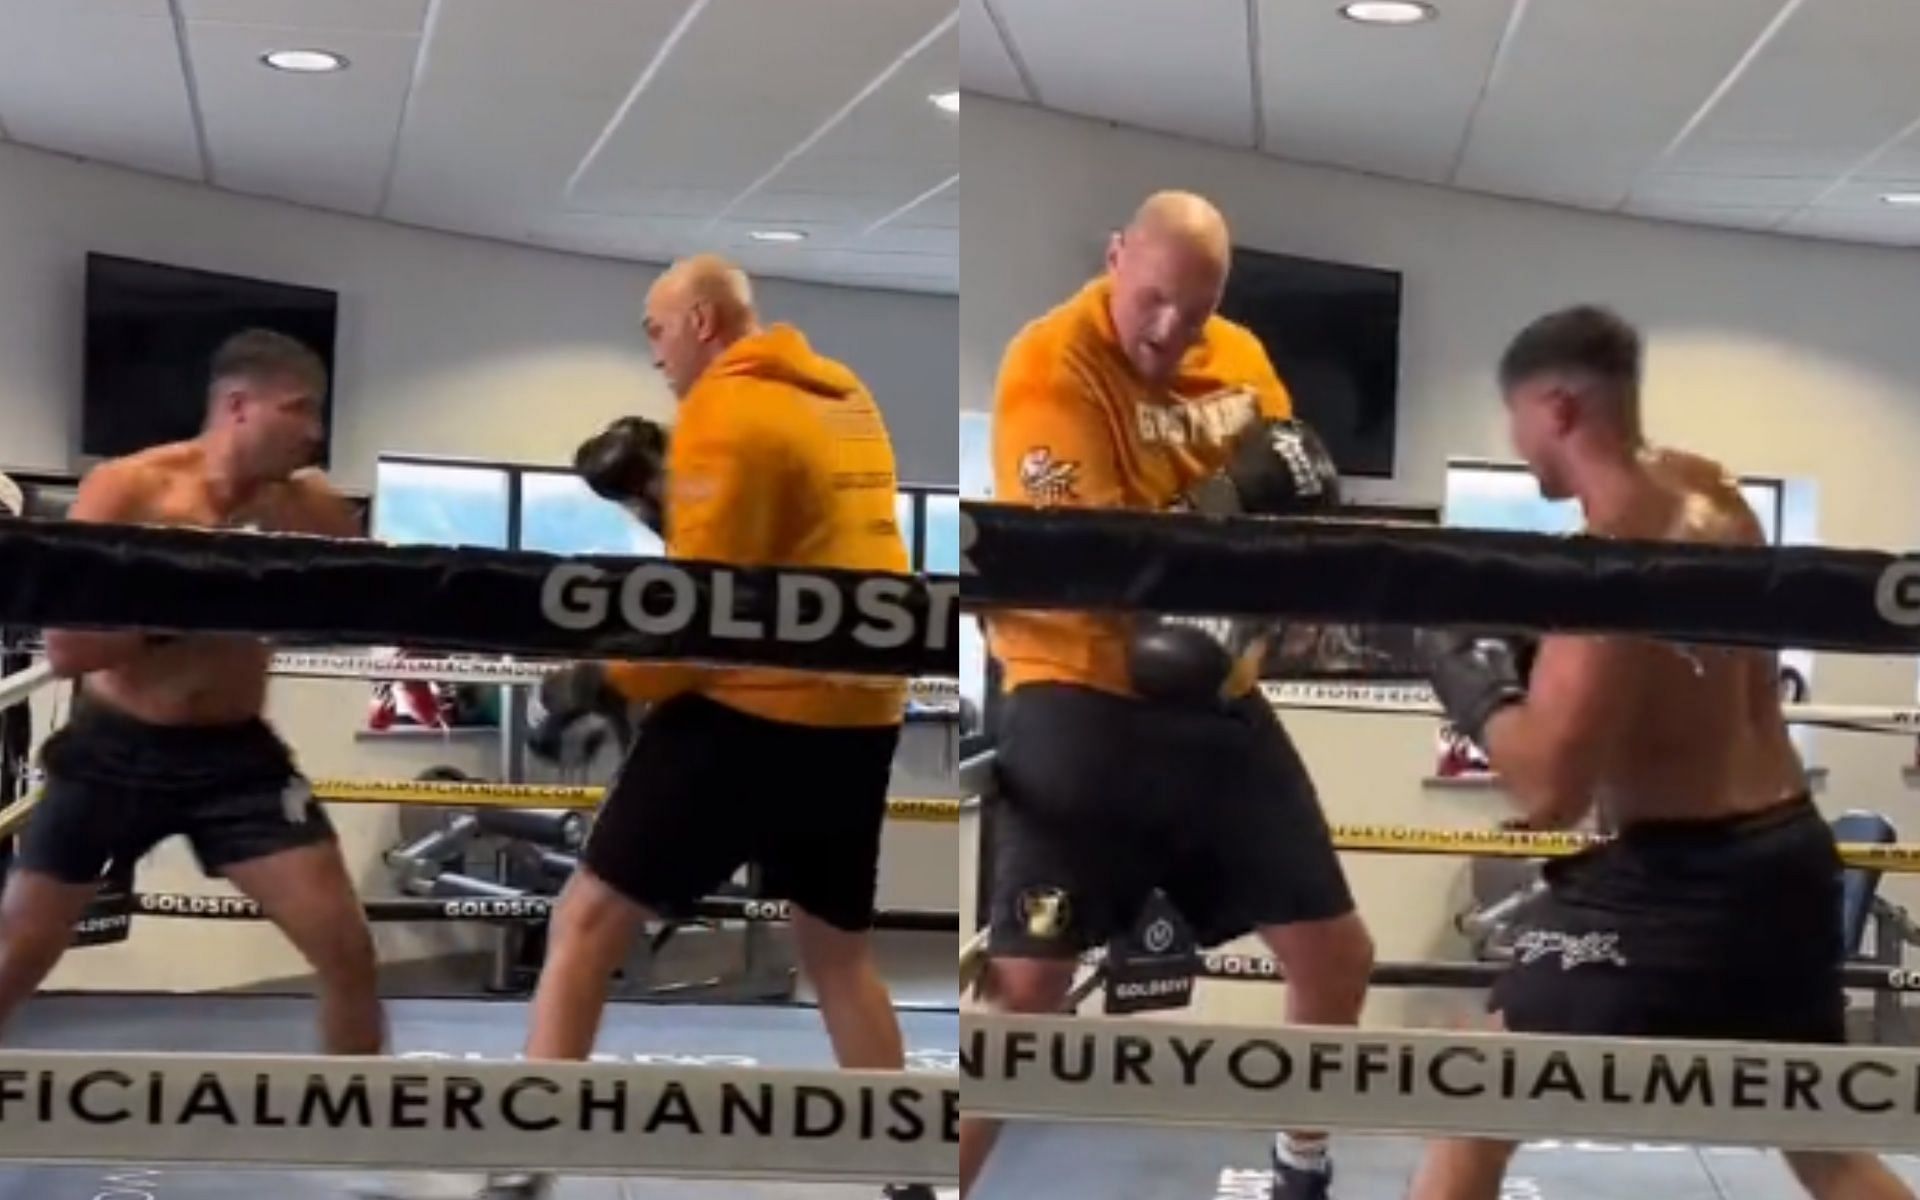 [Video from Tyson Fury